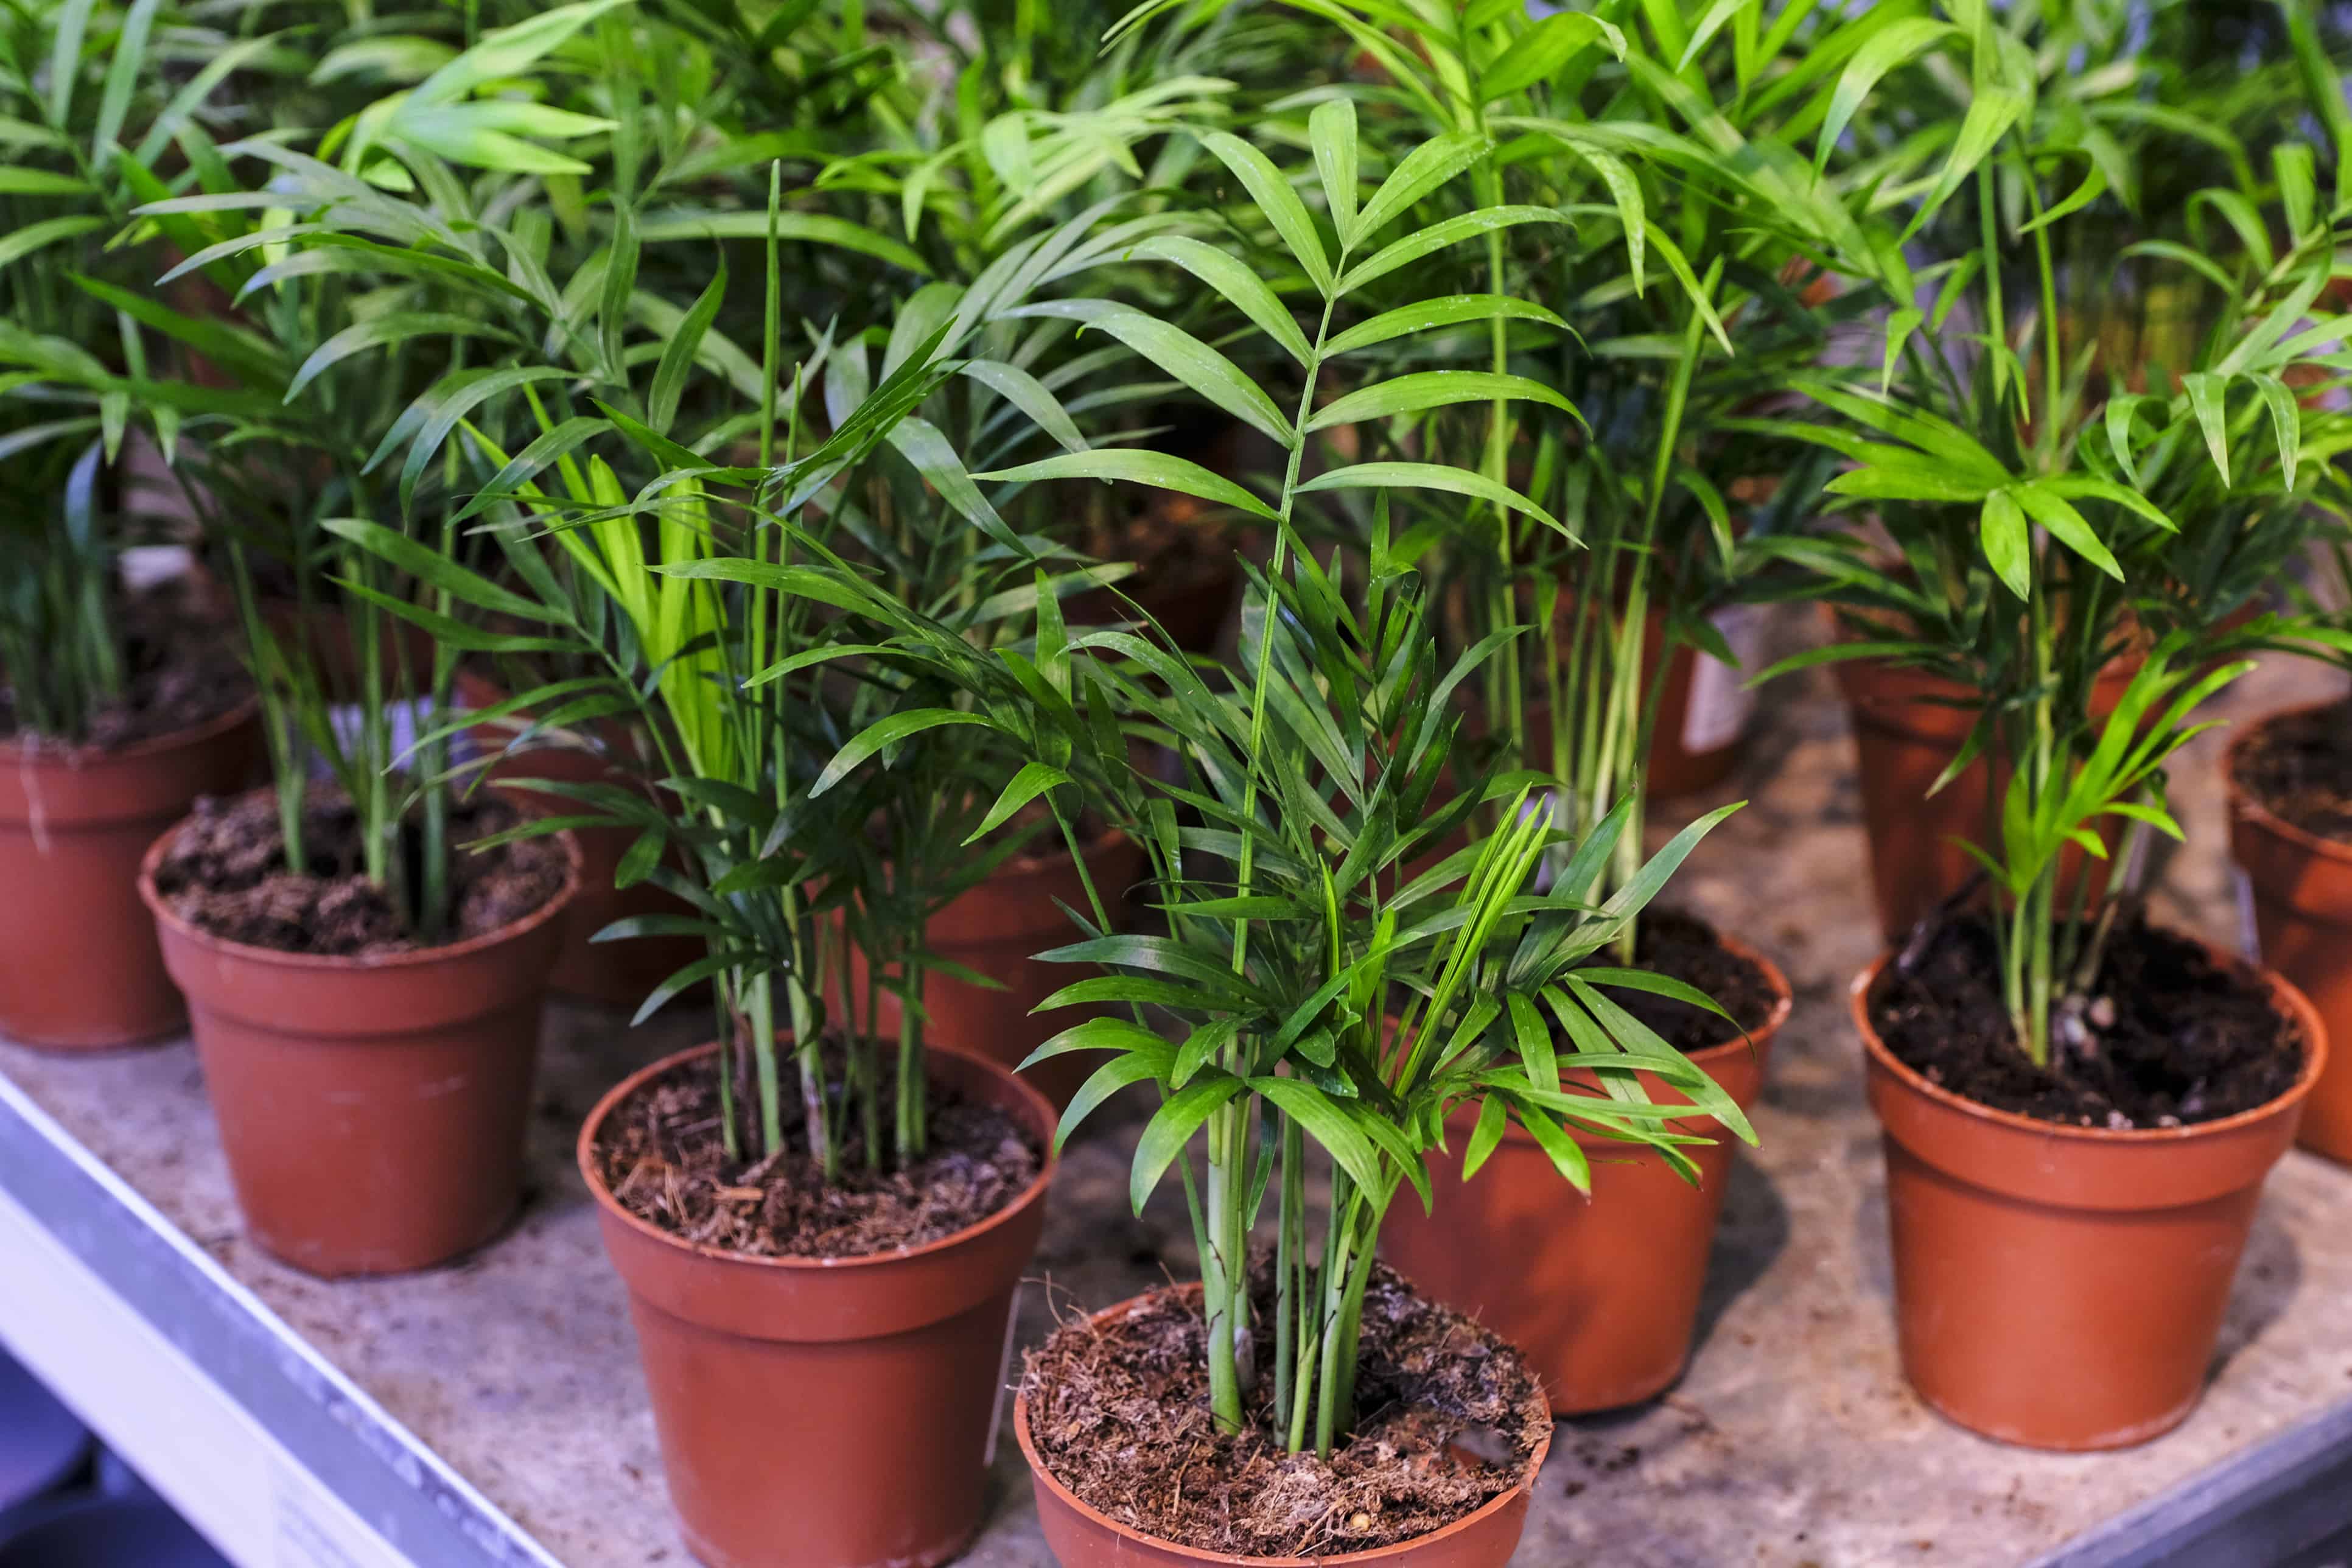 A group of Chamaedorea elegans or parlor palm plants in terracotta pots.